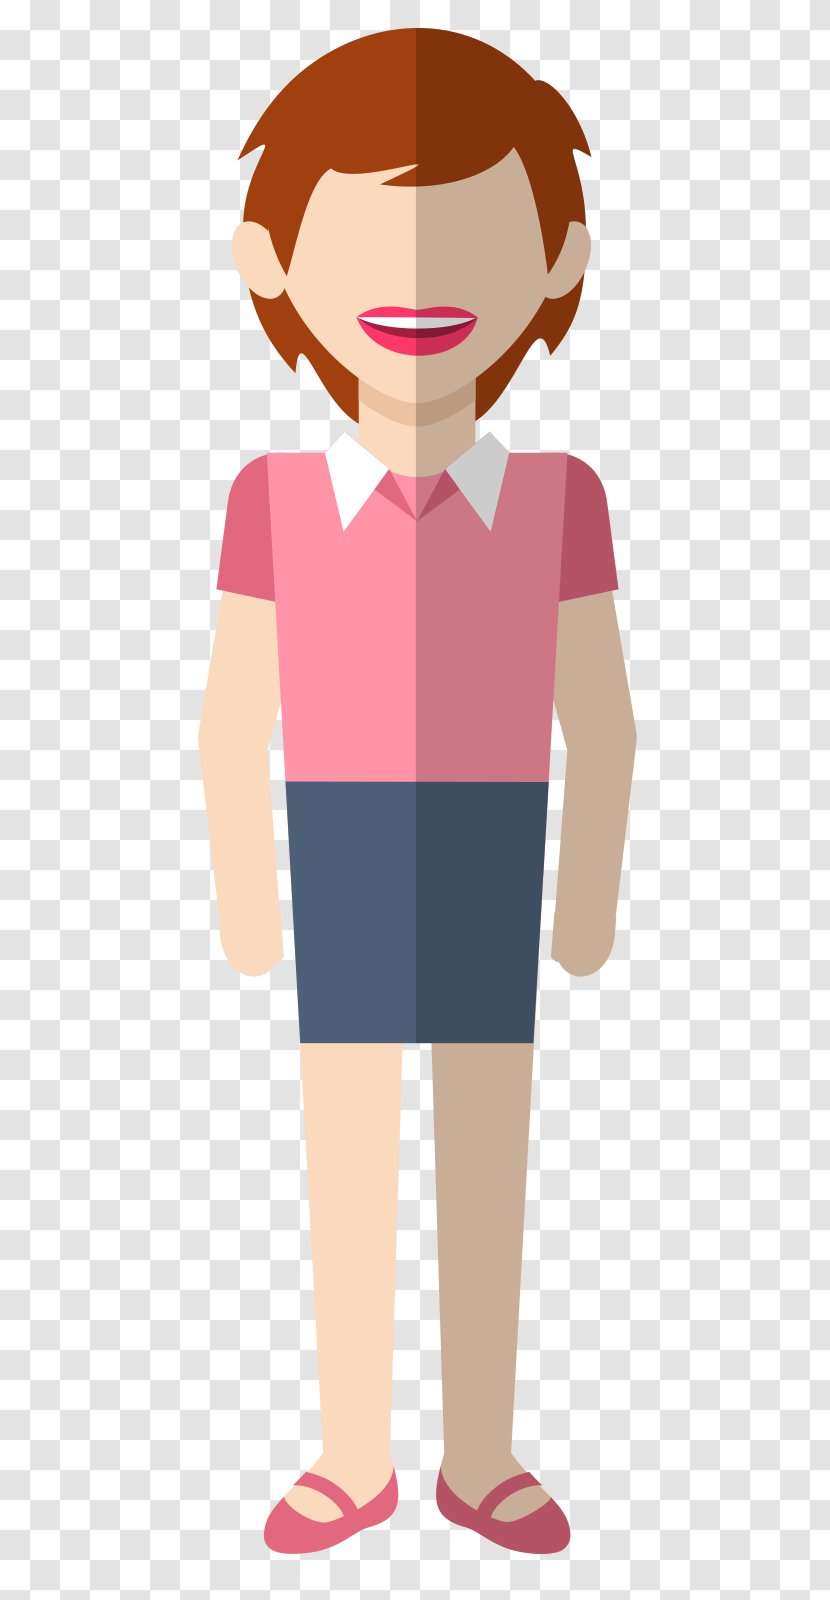 Avatar - Flower - Short Haired Woman Transparent PNG